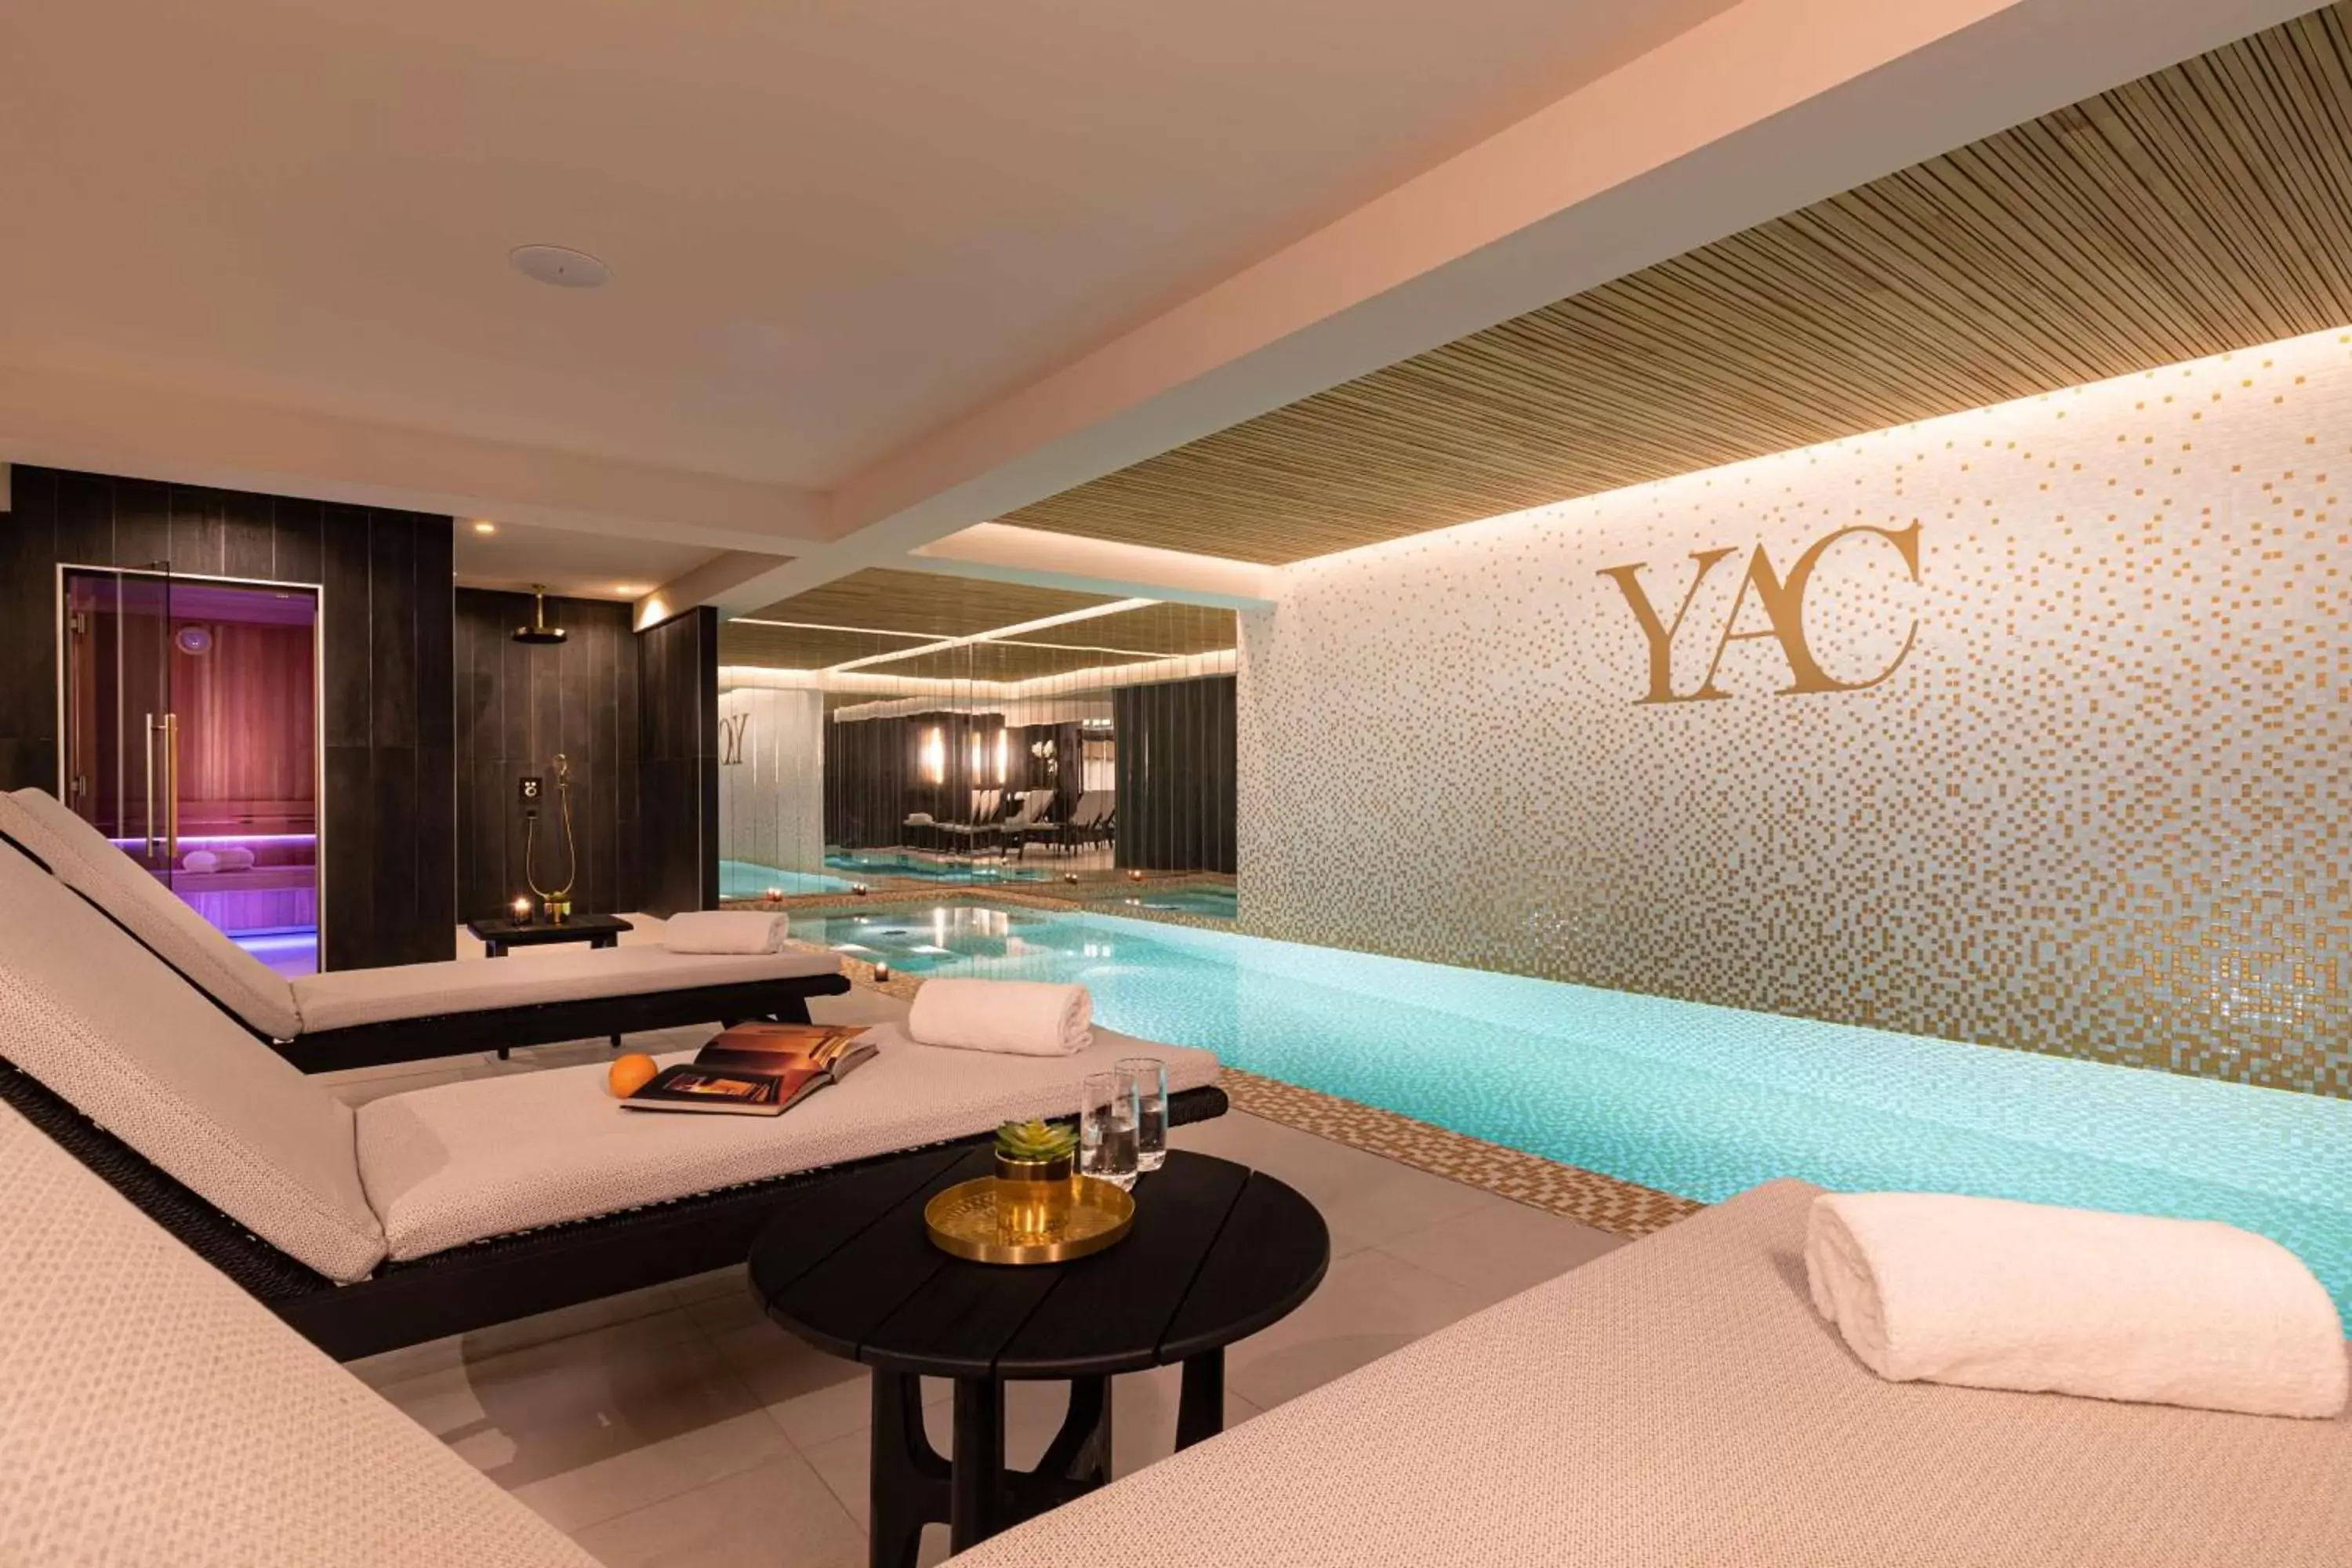 Pool view in Hotel Yac Paris Clichy, a member of Radisson Individuals